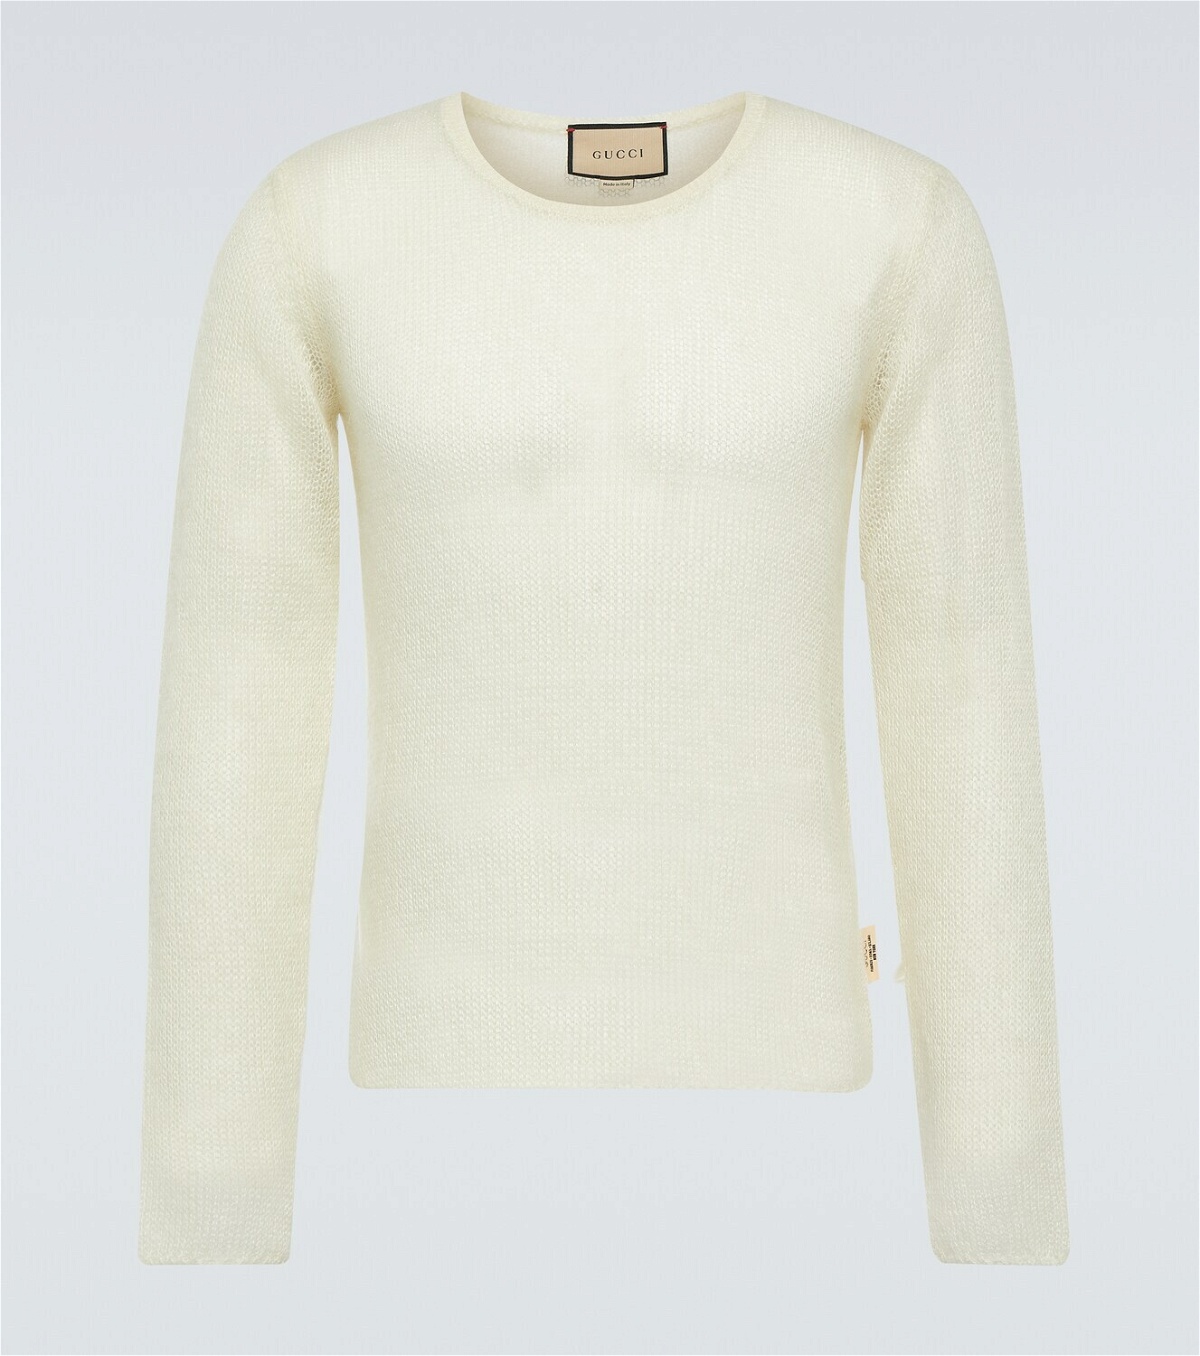 Gucci Mohair and silk sweater